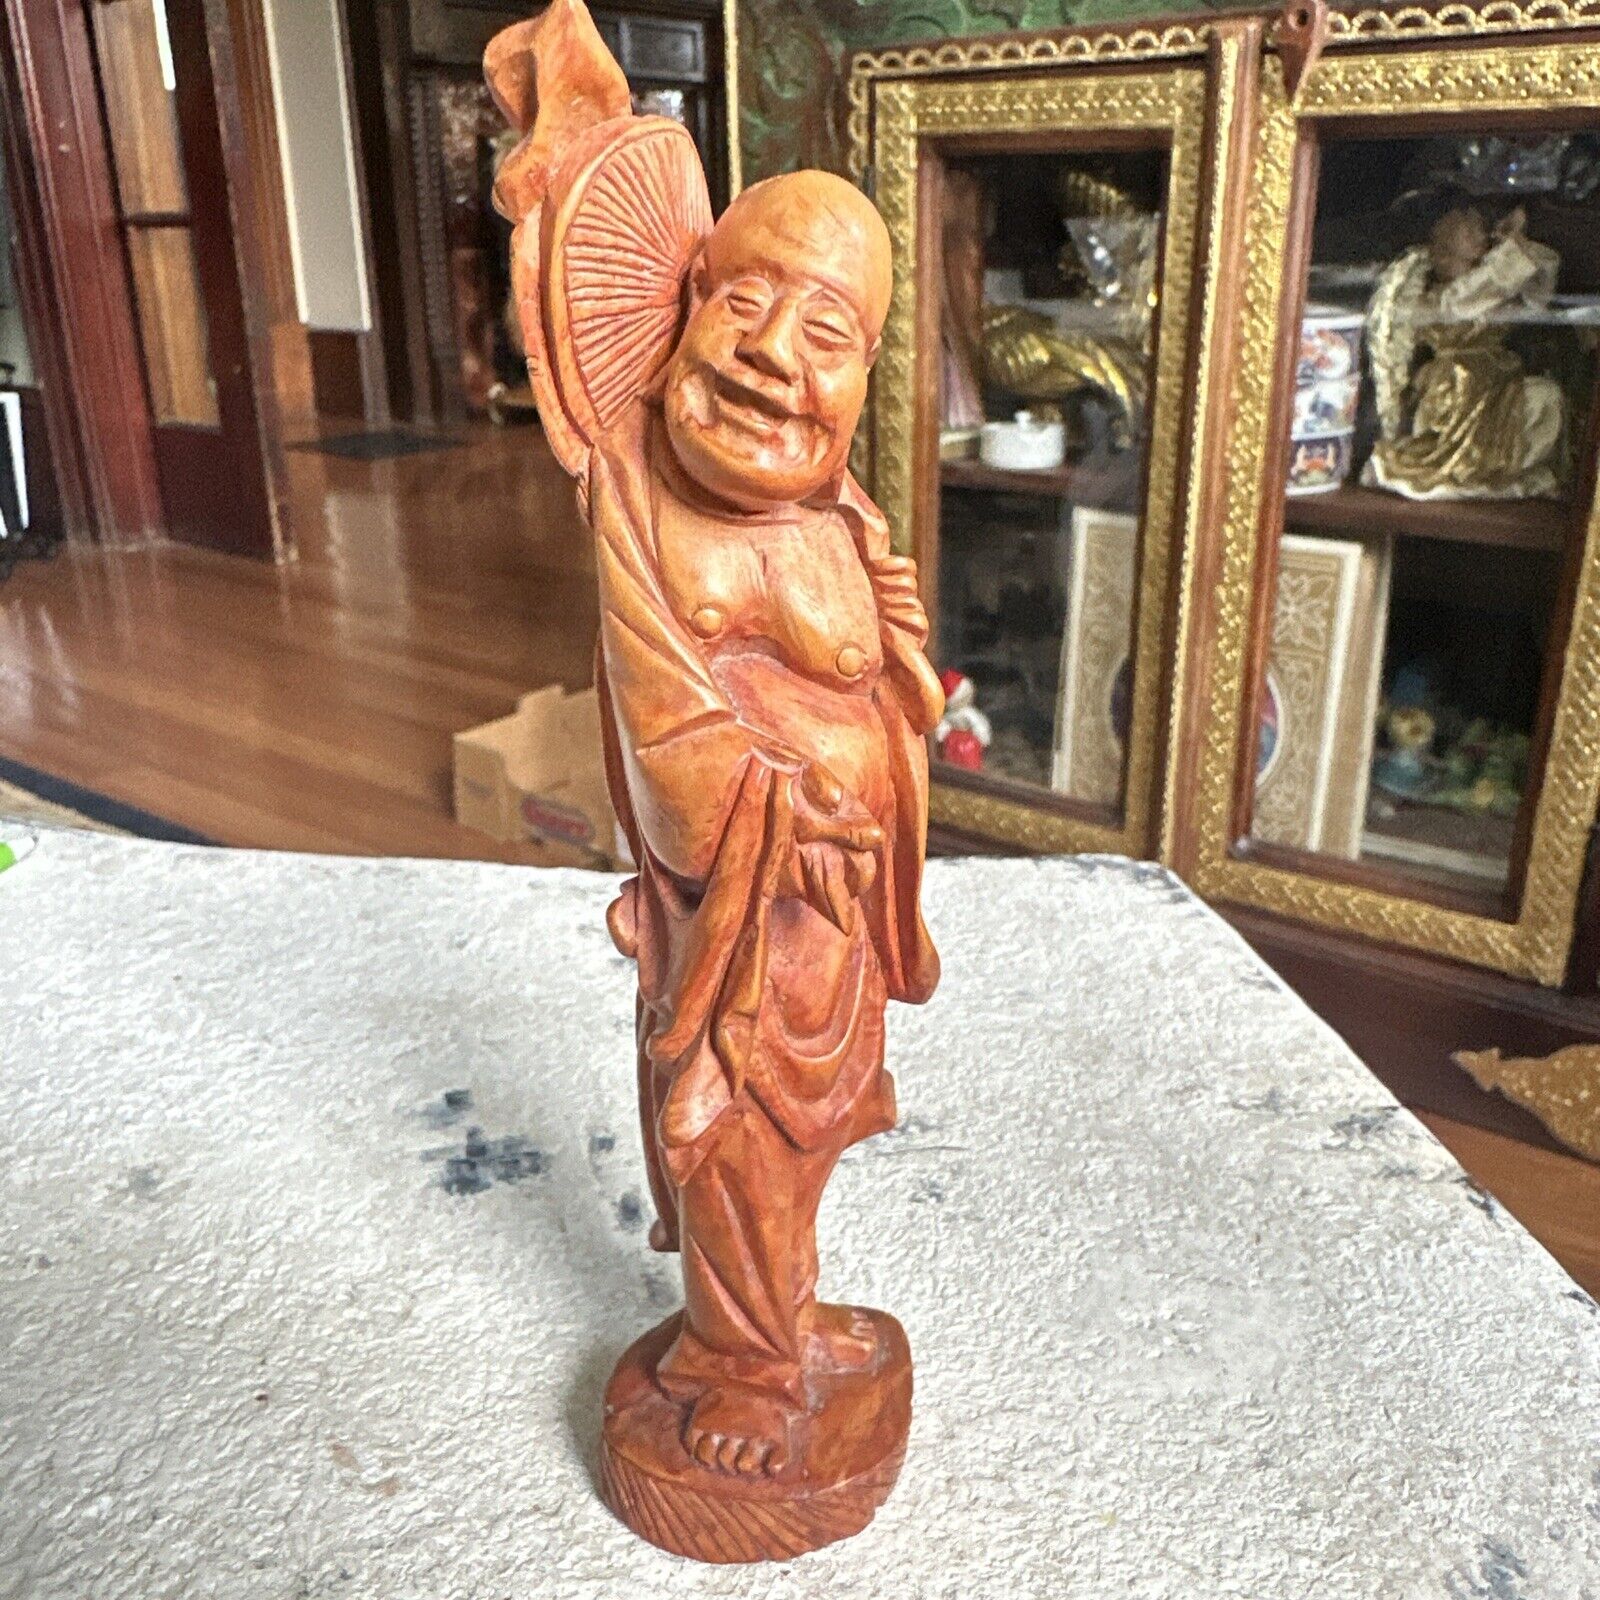 Antique Hand Carved Rosewood Asian Figure of a Laughing Buddha Smiling 6.5”